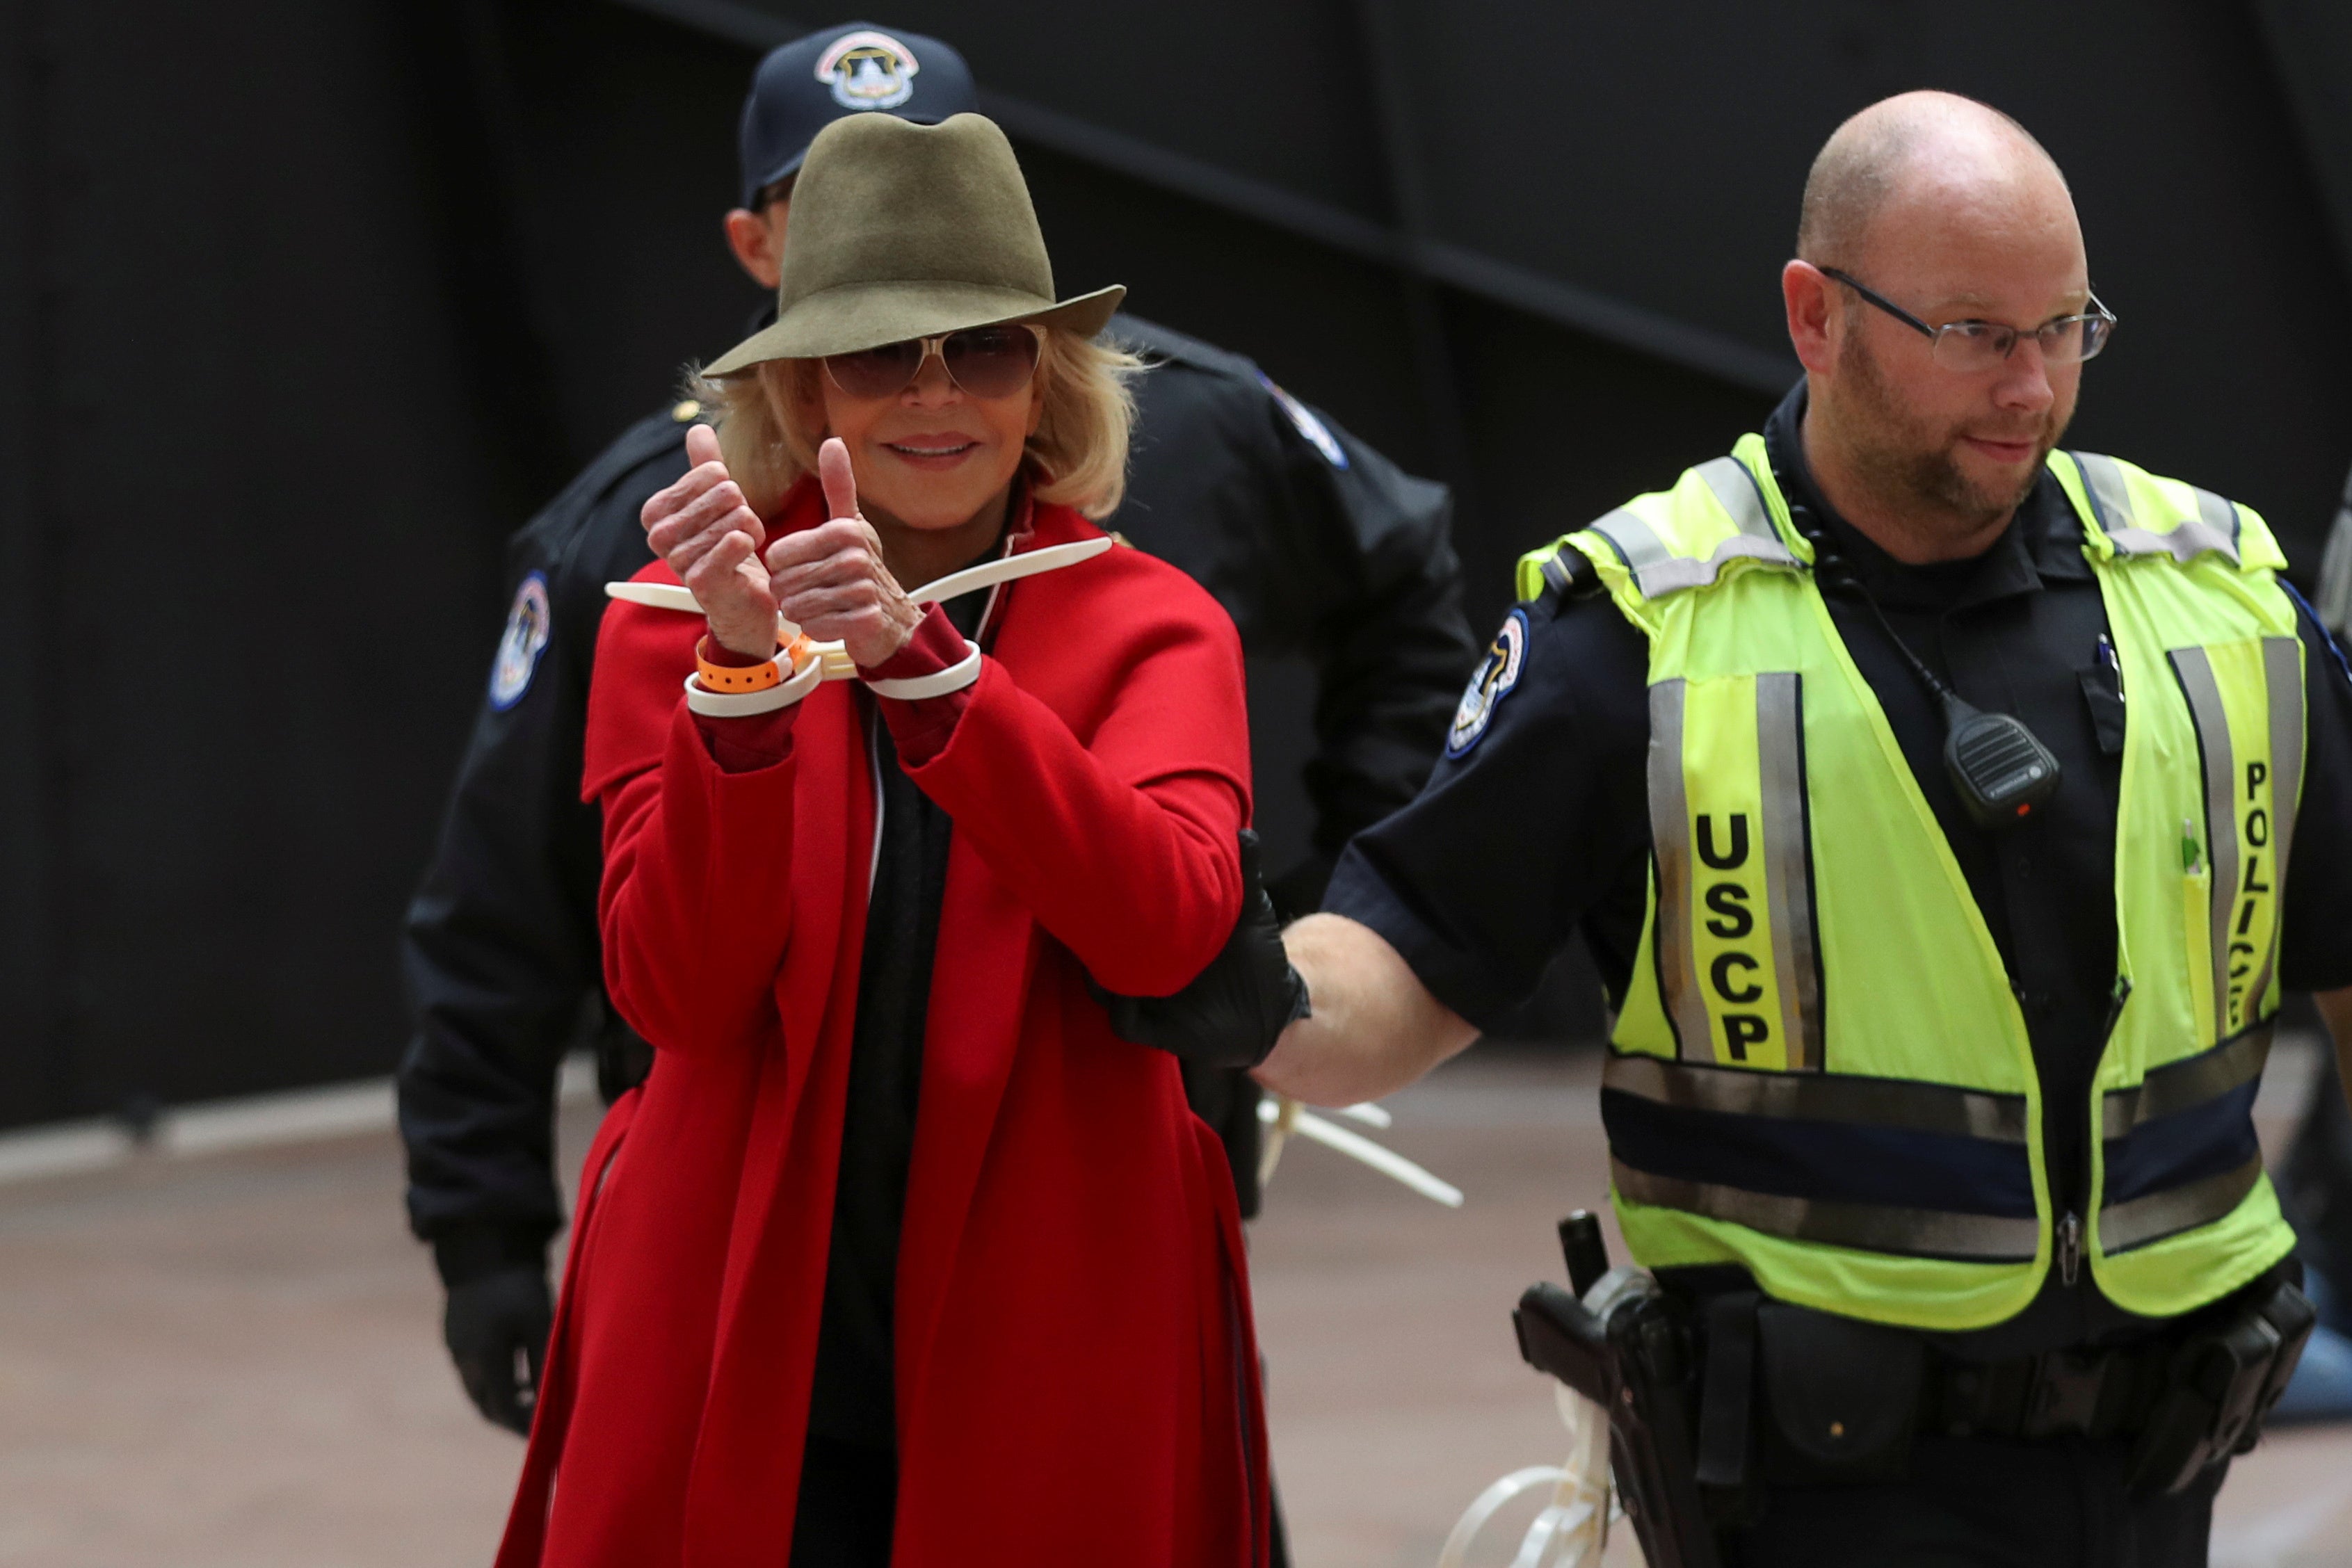 Actress Jane Fonda is arrested by US Capital Police during a climate change protest in 2020